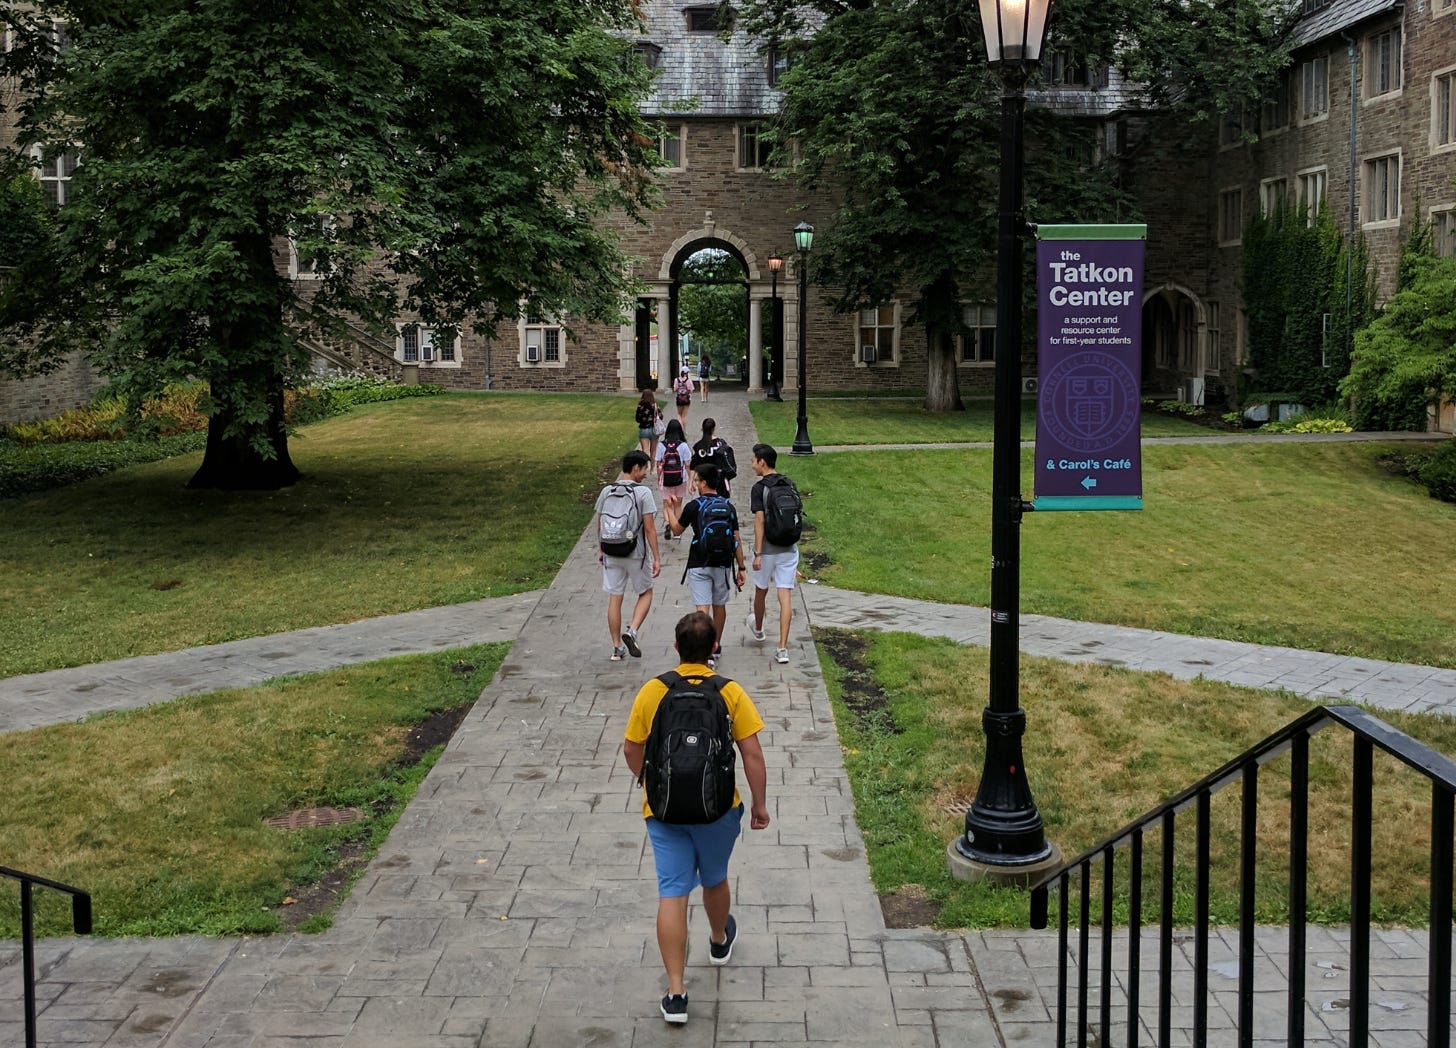 View from behind several students as they walk through a courtyard toward an archway.